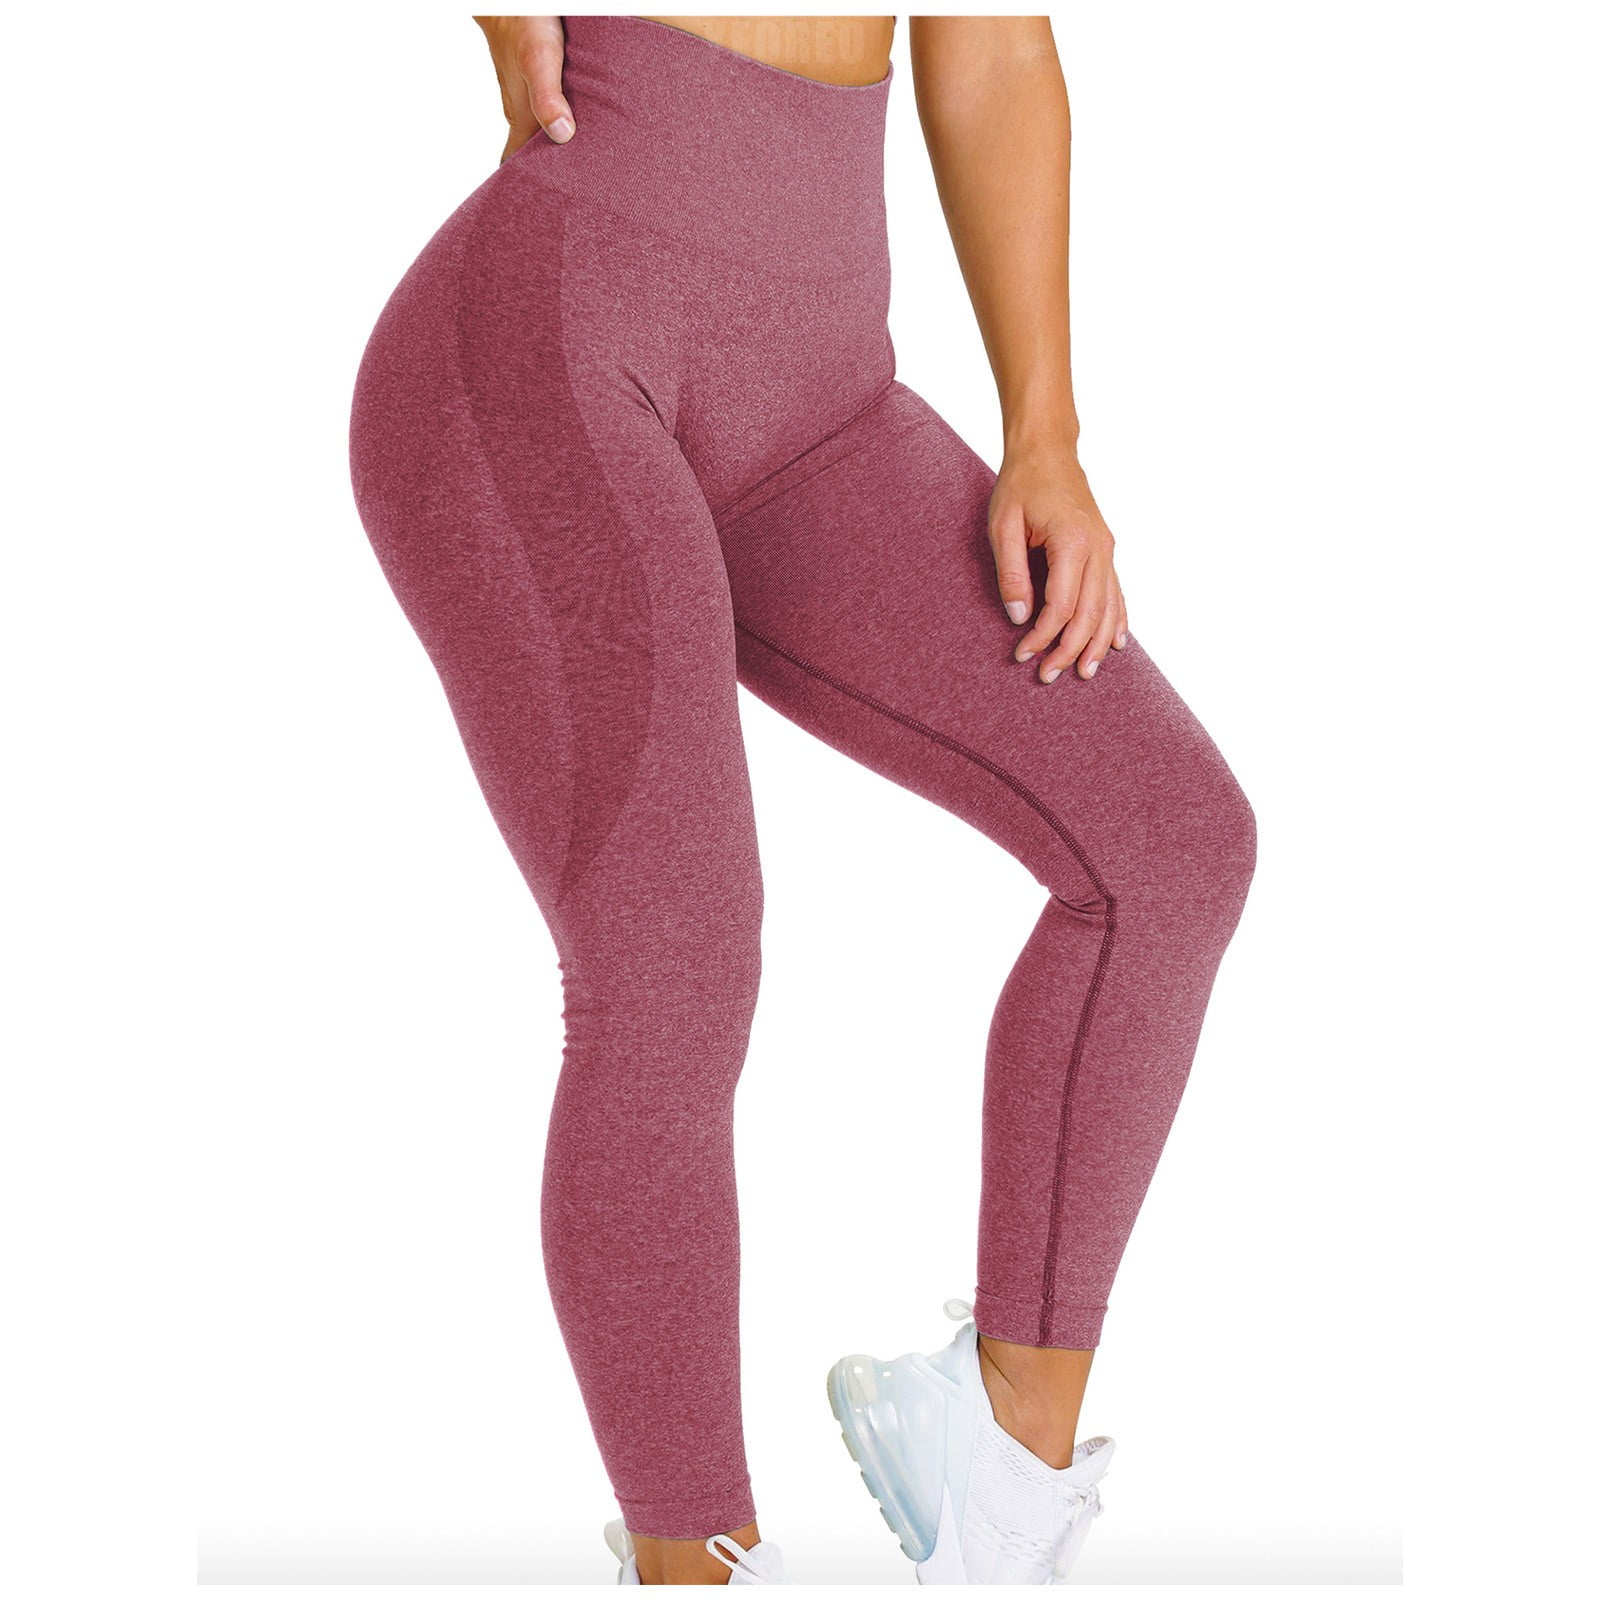 PMUYBHF Plus Size Pants for Women 3X-4X with Pockets Christmas in July Plus  Size Yoga Pants for Women Women's Seamless Snowflake Color Pants Jacquard  Seamless Yoga Pants Fitness Cropped Pants Yoga 